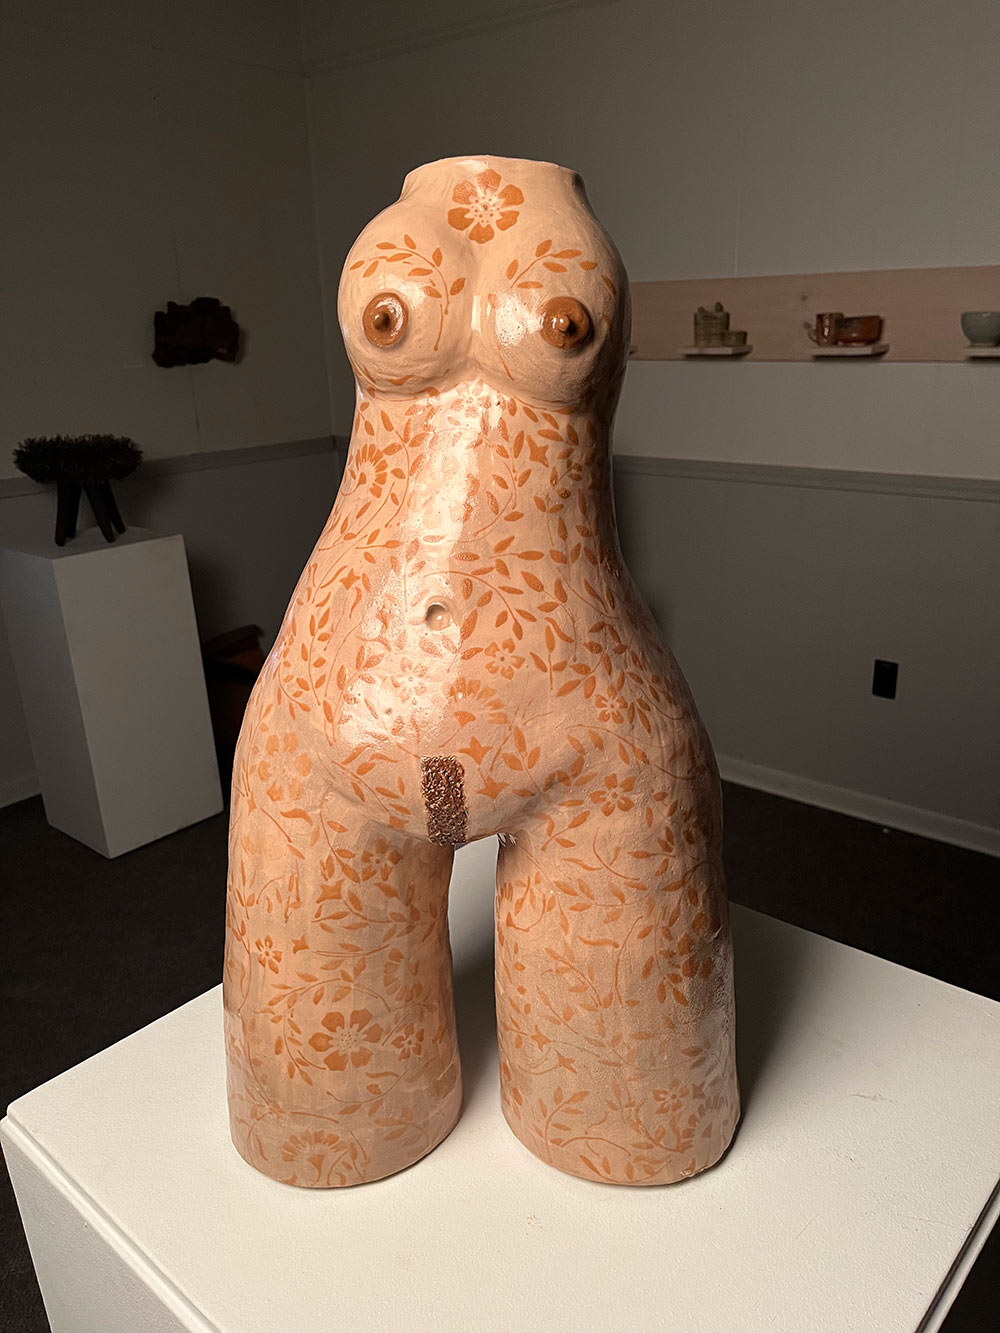 A tall fair skinned sculpture with brown floral tattoos covering the entire piece